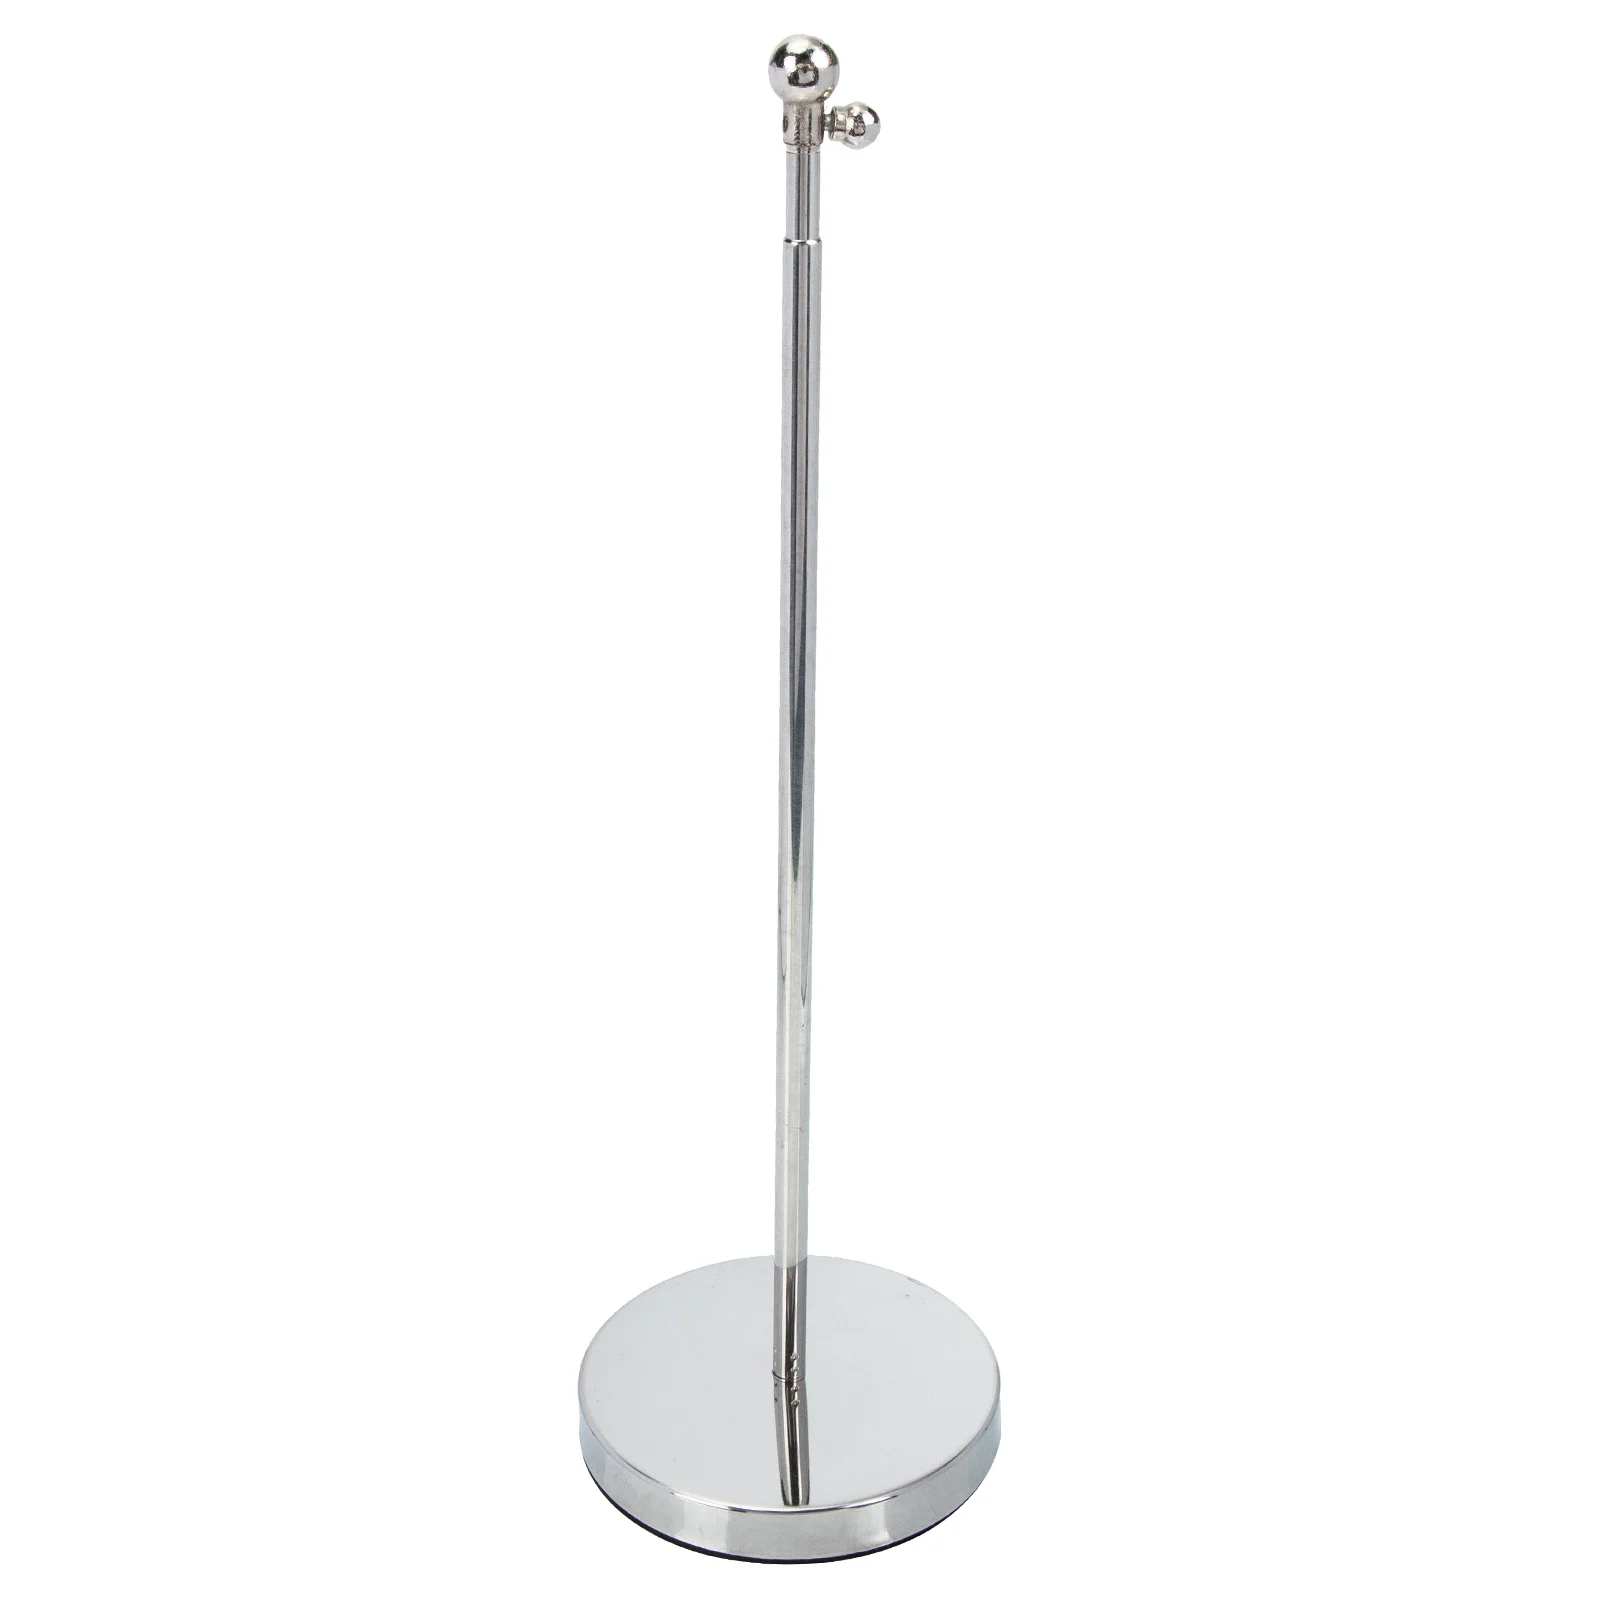 

Telescopic Flag Stand Stainless Table Sturdy Base Ornaments Household Holder Steel Desktop Supply Work Pole